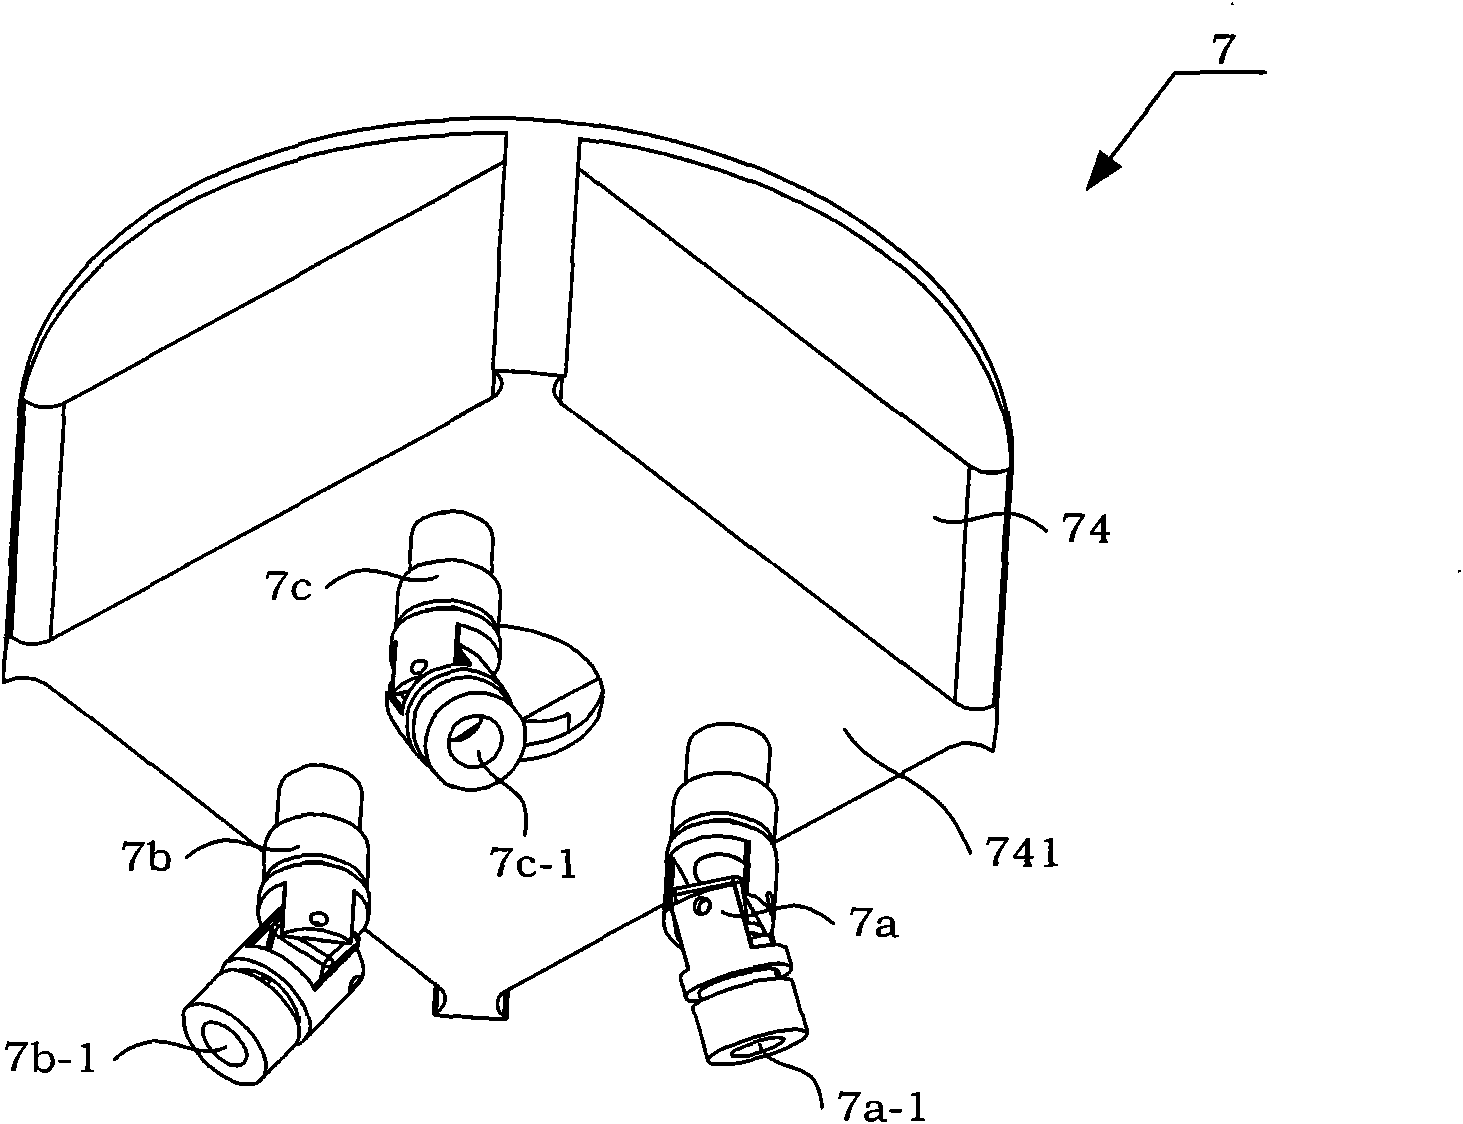 Tetrahedral rolling robot with parallel mechanism